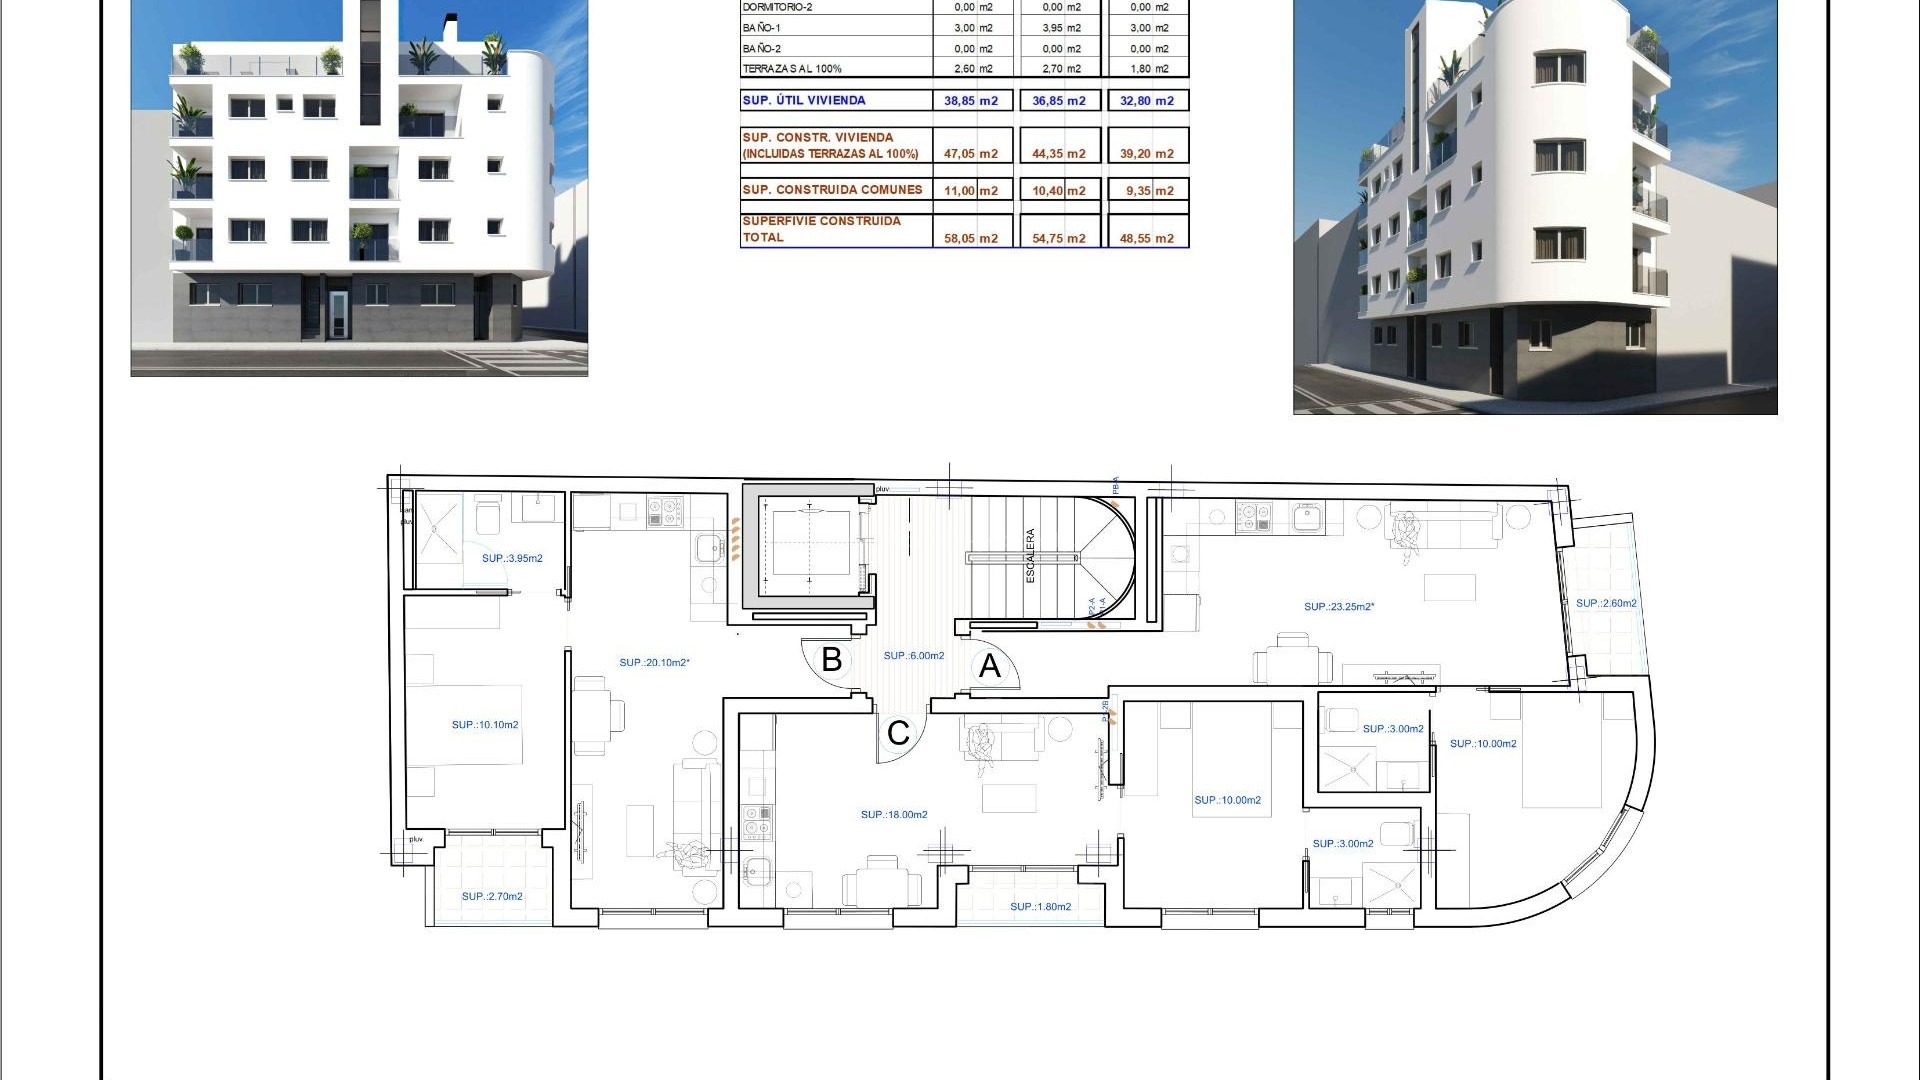 New modern apartments with high quality finishes in Torrevieja, 1/2 bedroom, 1/2 bathroom, open kitchen and living room, a beautiful shared solarium